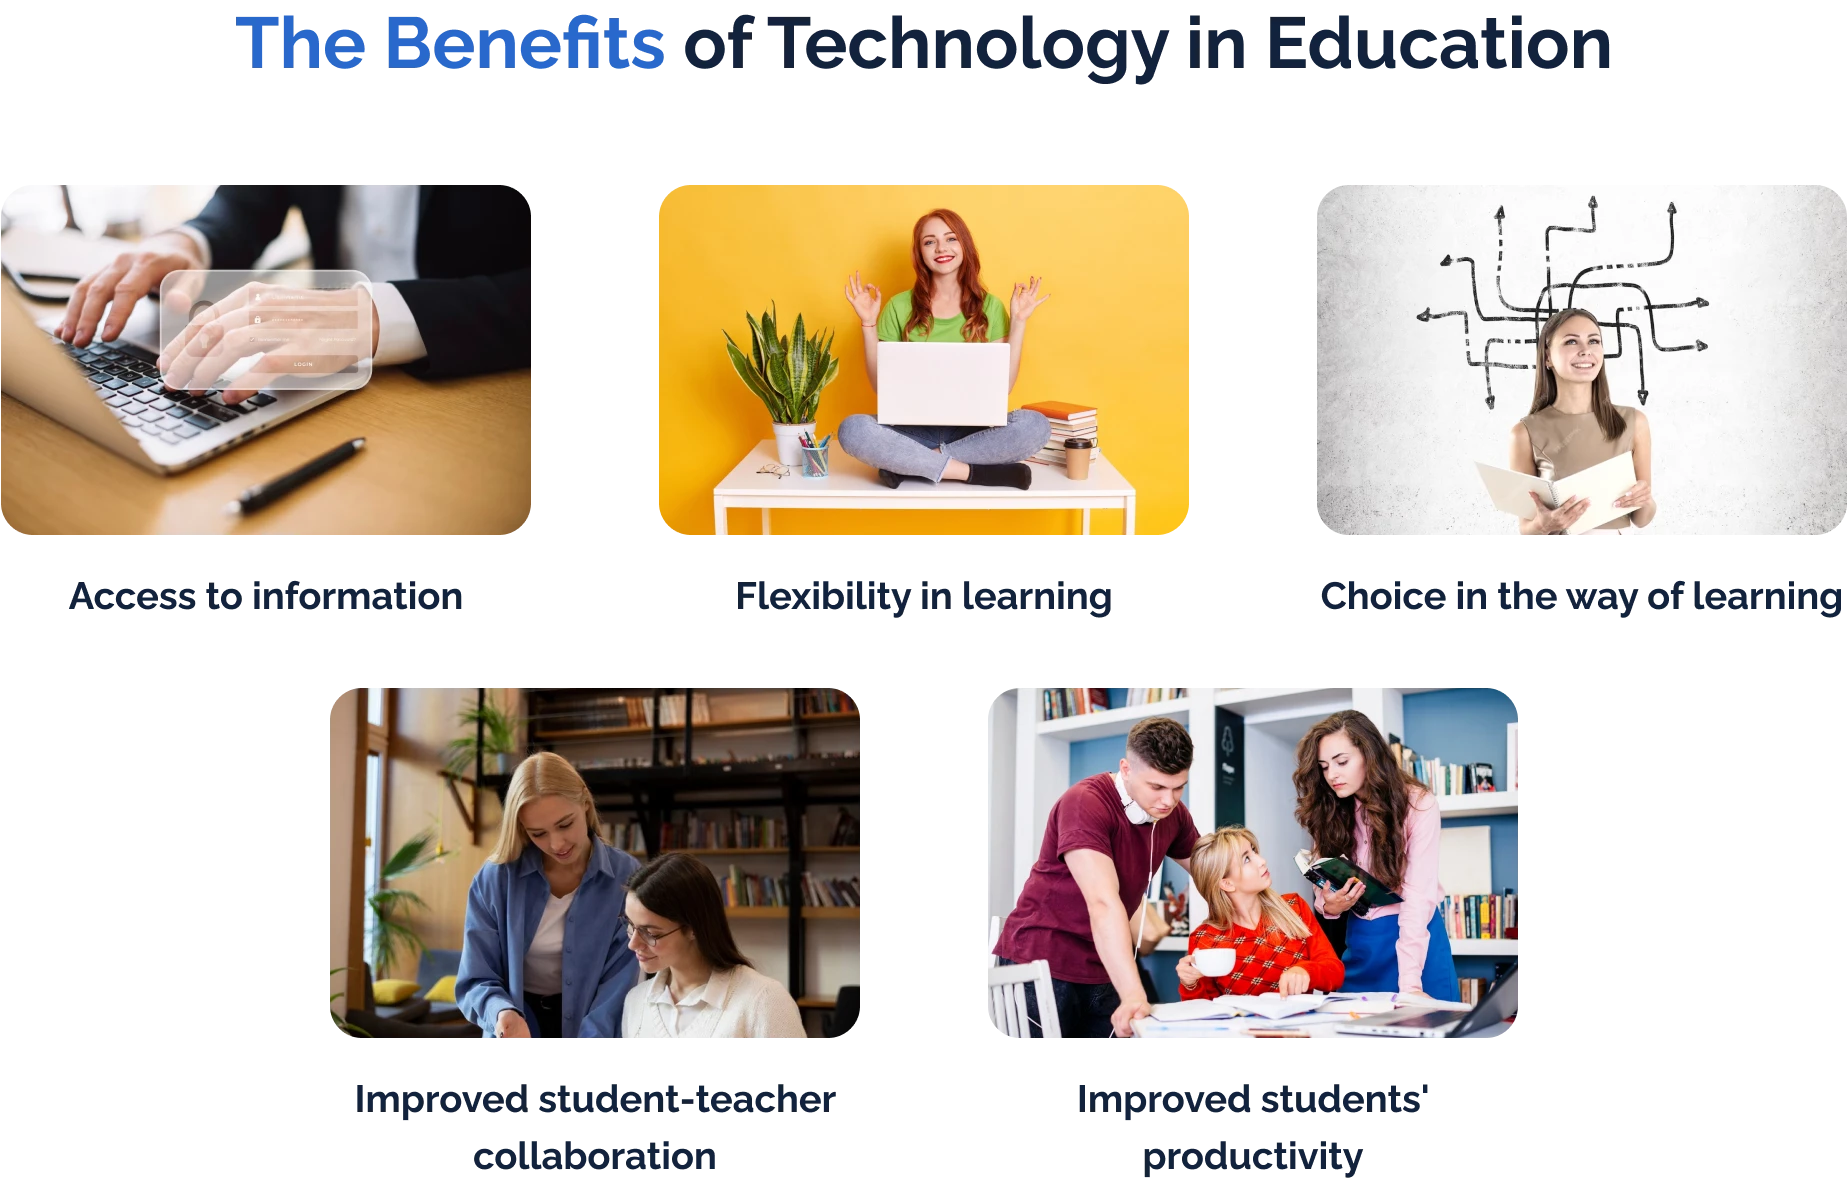 The benefits of technology in education